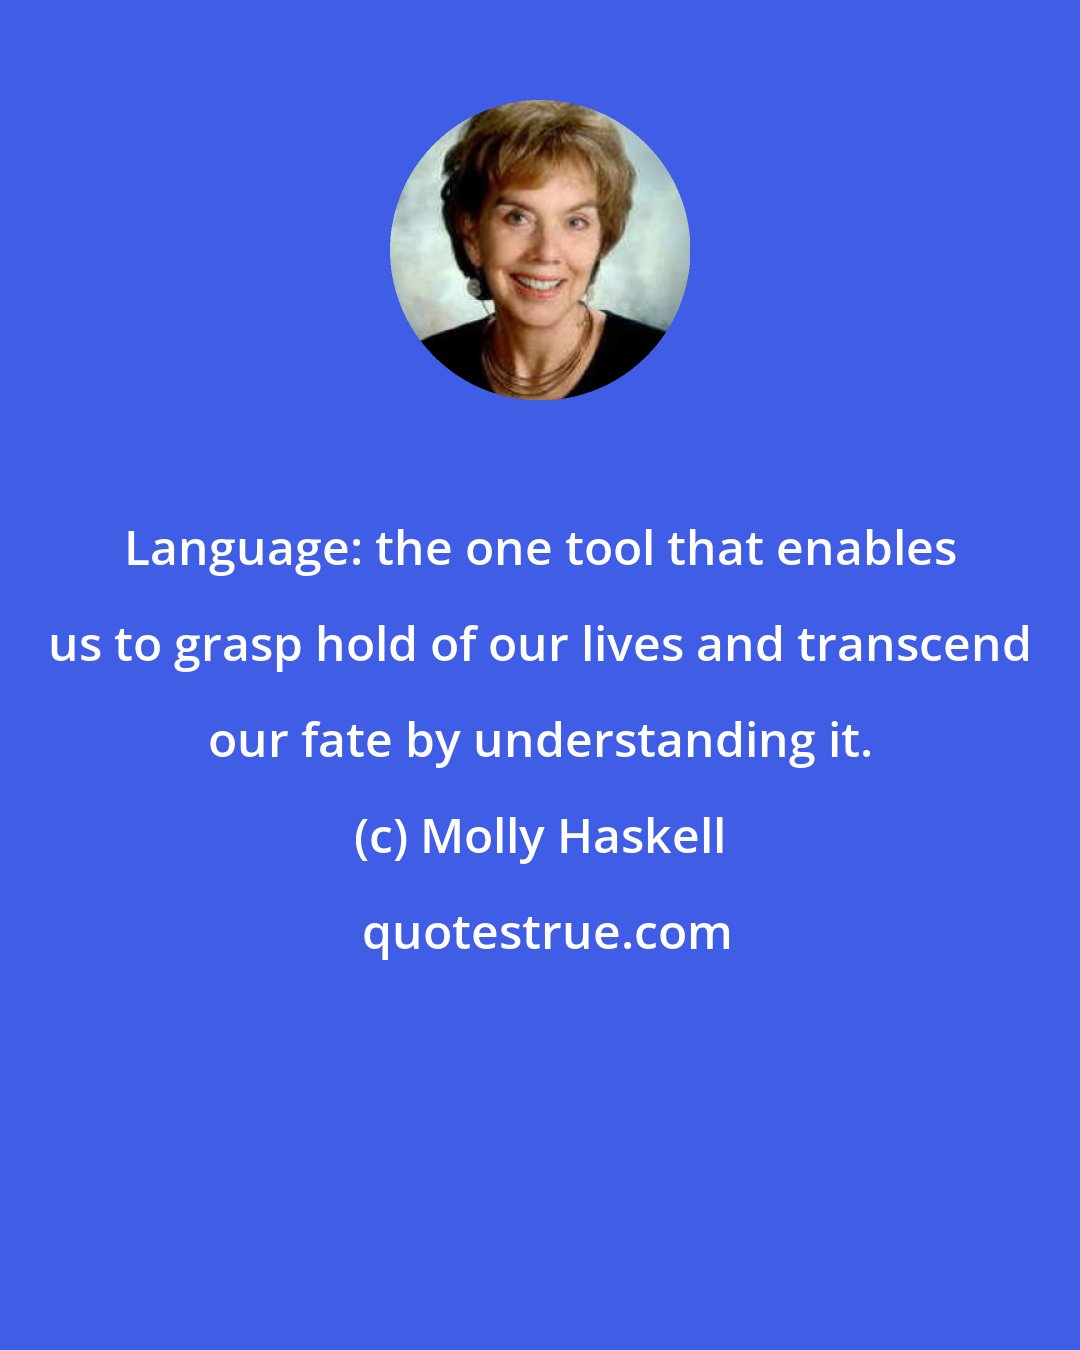 Molly Haskell: Language: the one tool that enables us to grasp hold of our lives and transcend our fate by understanding it.